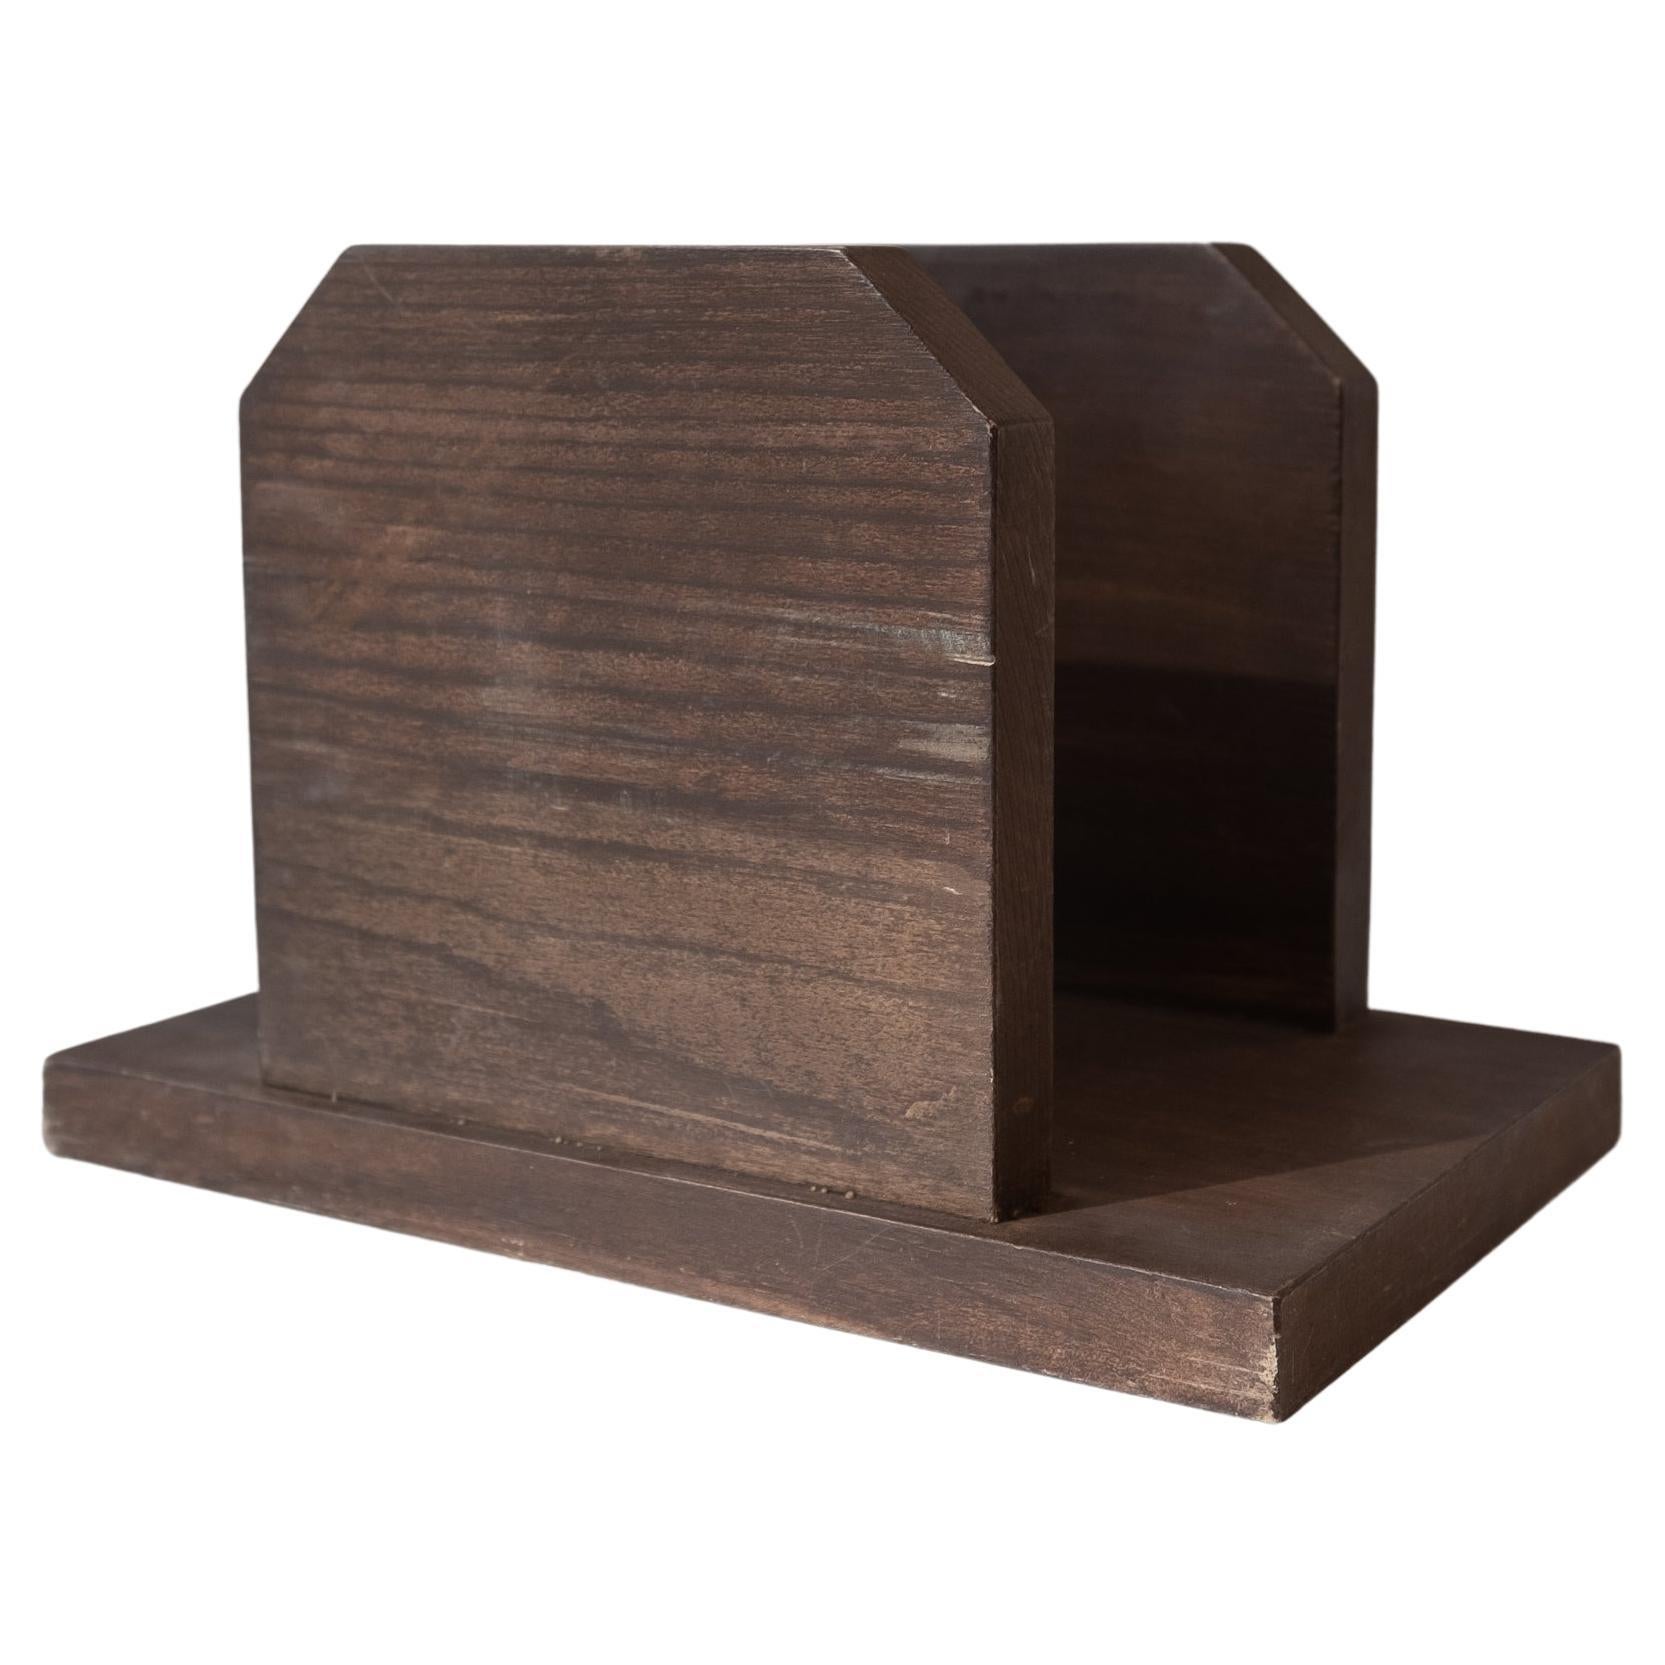 Desktop Book or Mail holder by John Lloyd Wright For Sale